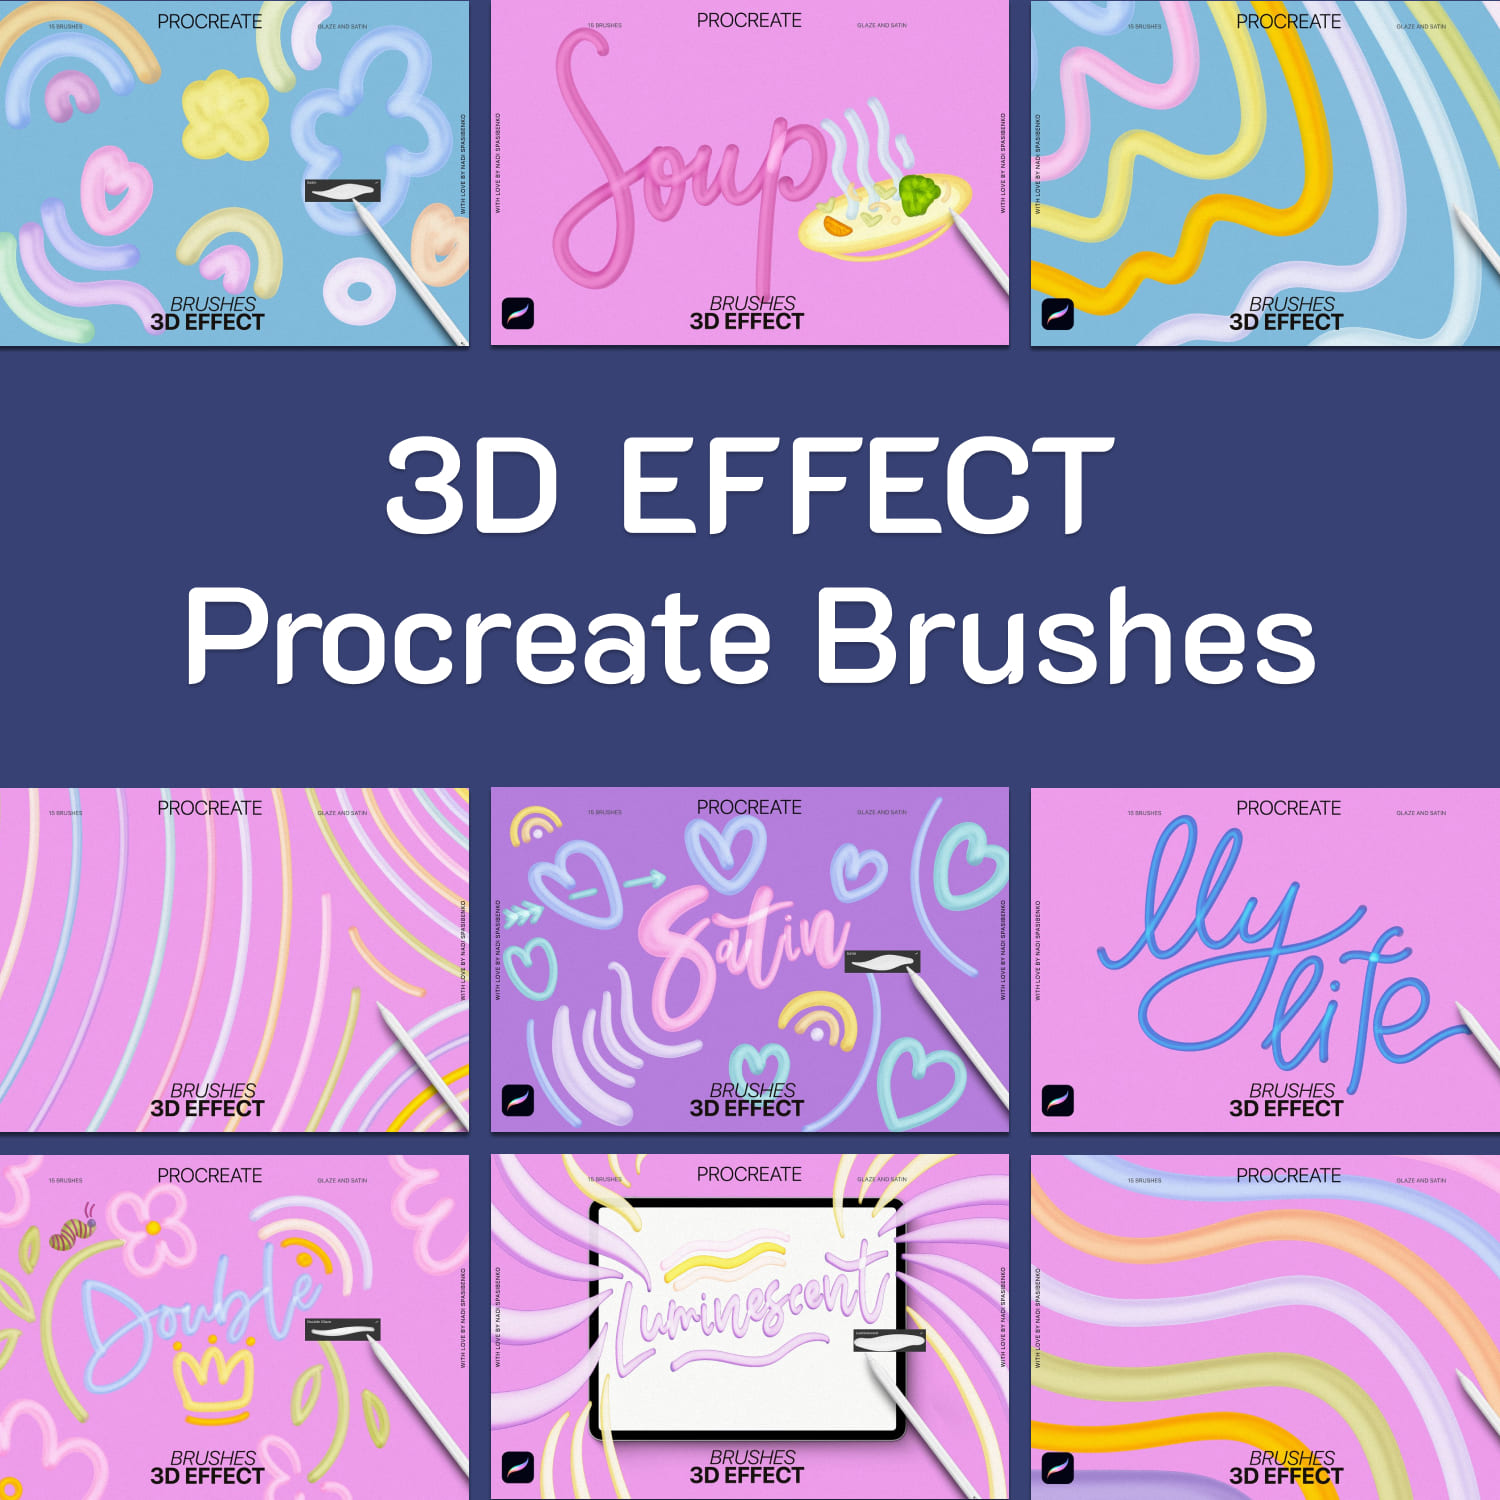 Slides of procreate brushes with 3D eefect.